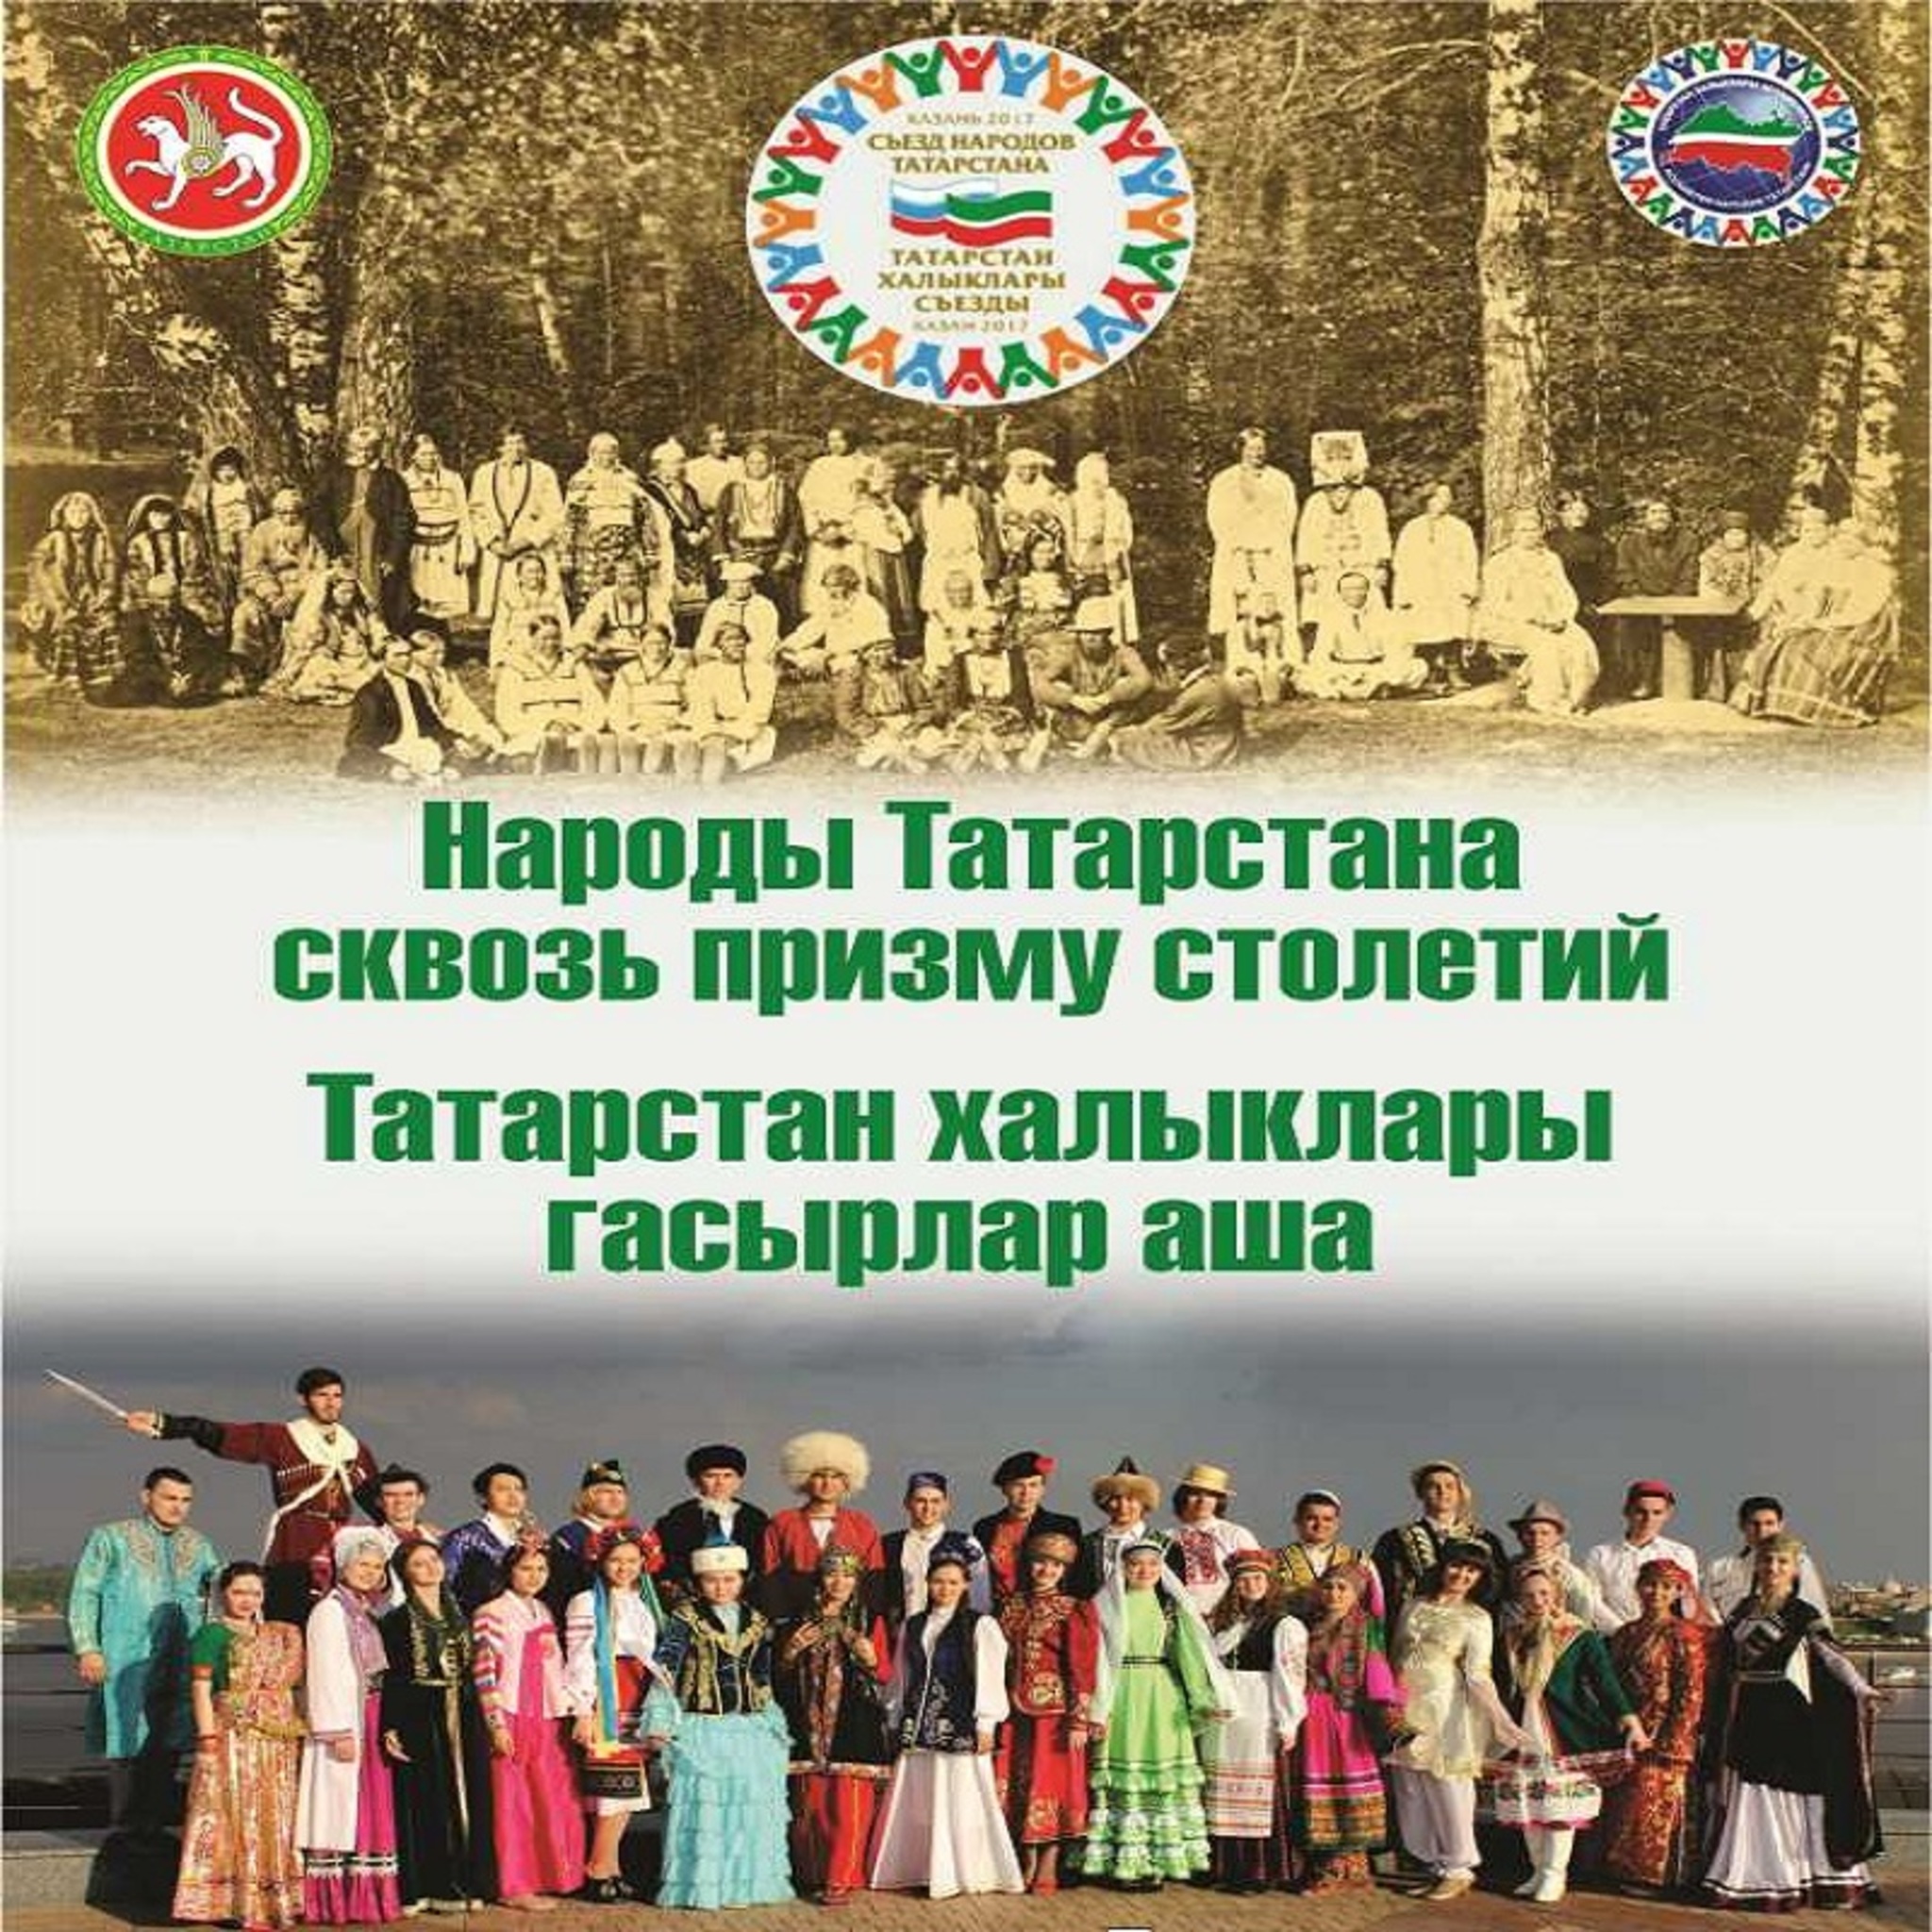 Exhibition Peoples of Tatarstan through the prism of centuries